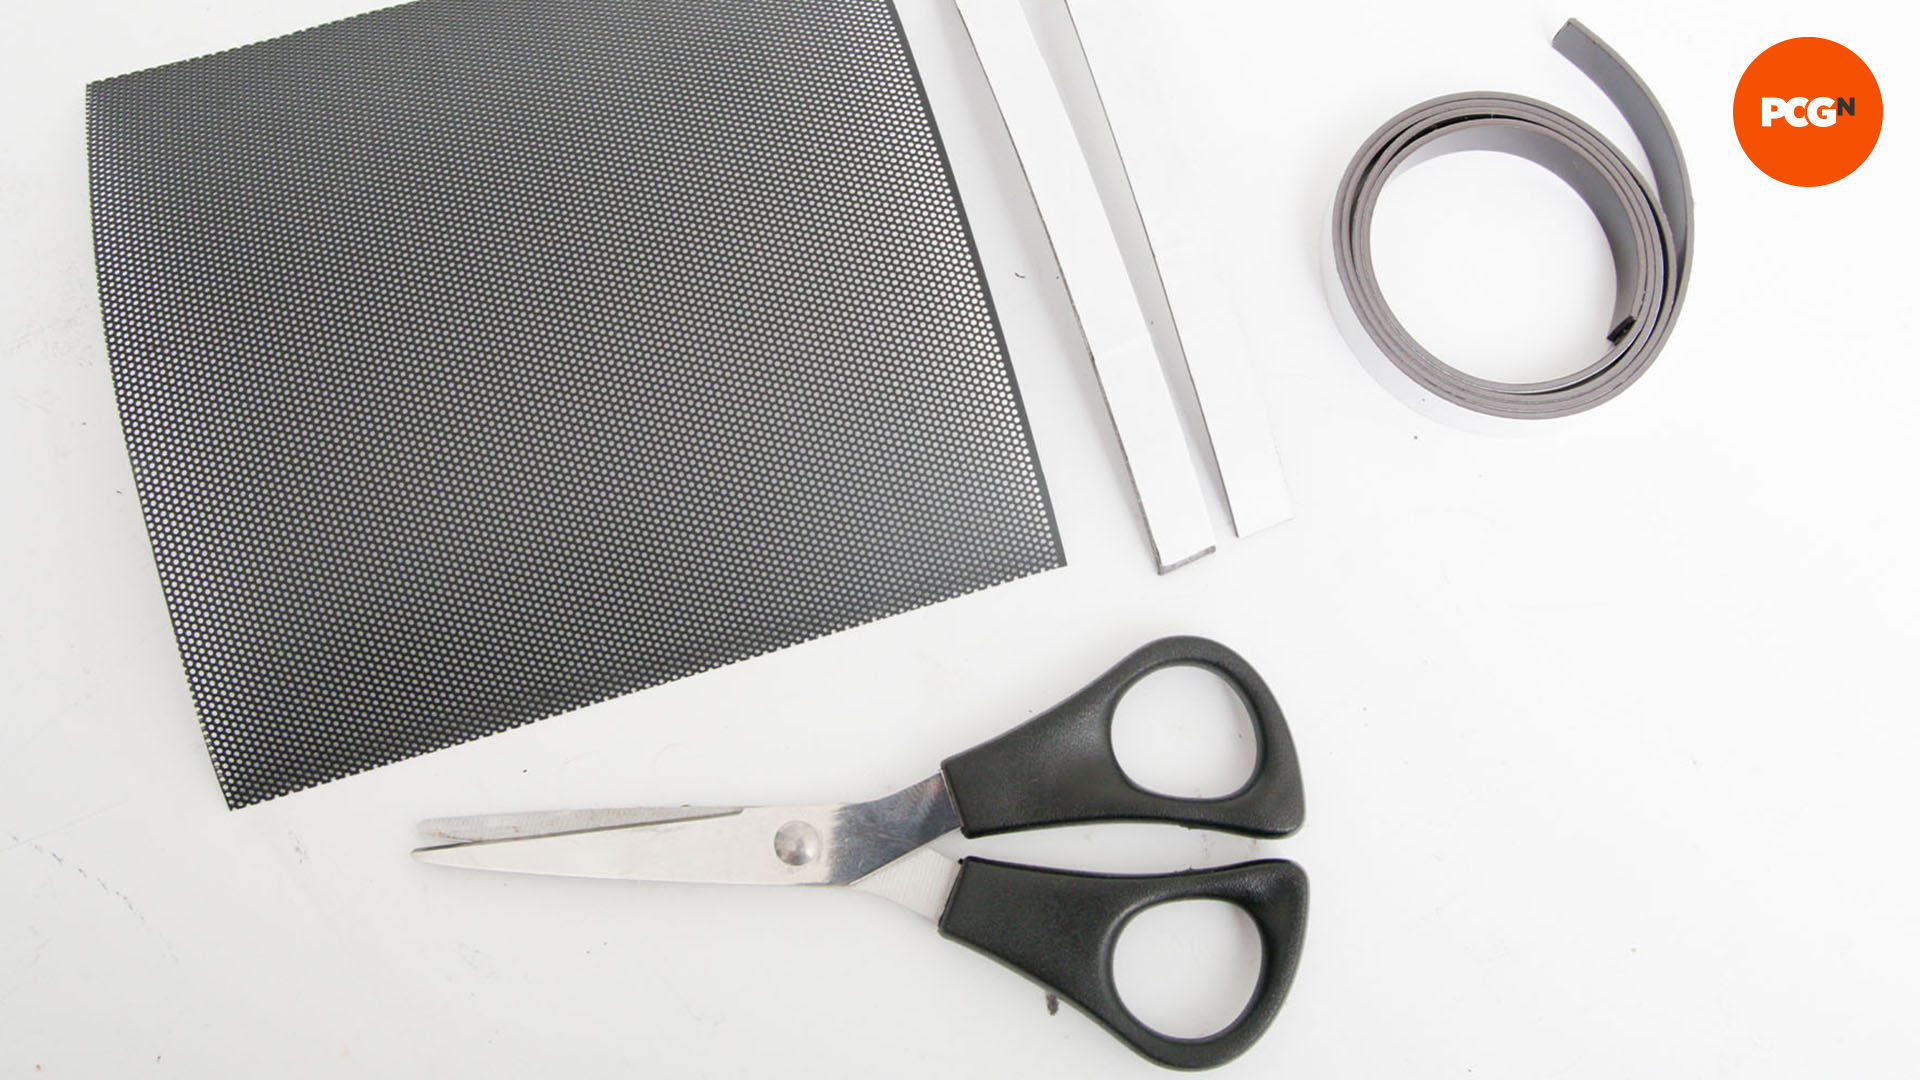 How to stop dust getting into your PC: Cut magnetic strips to size